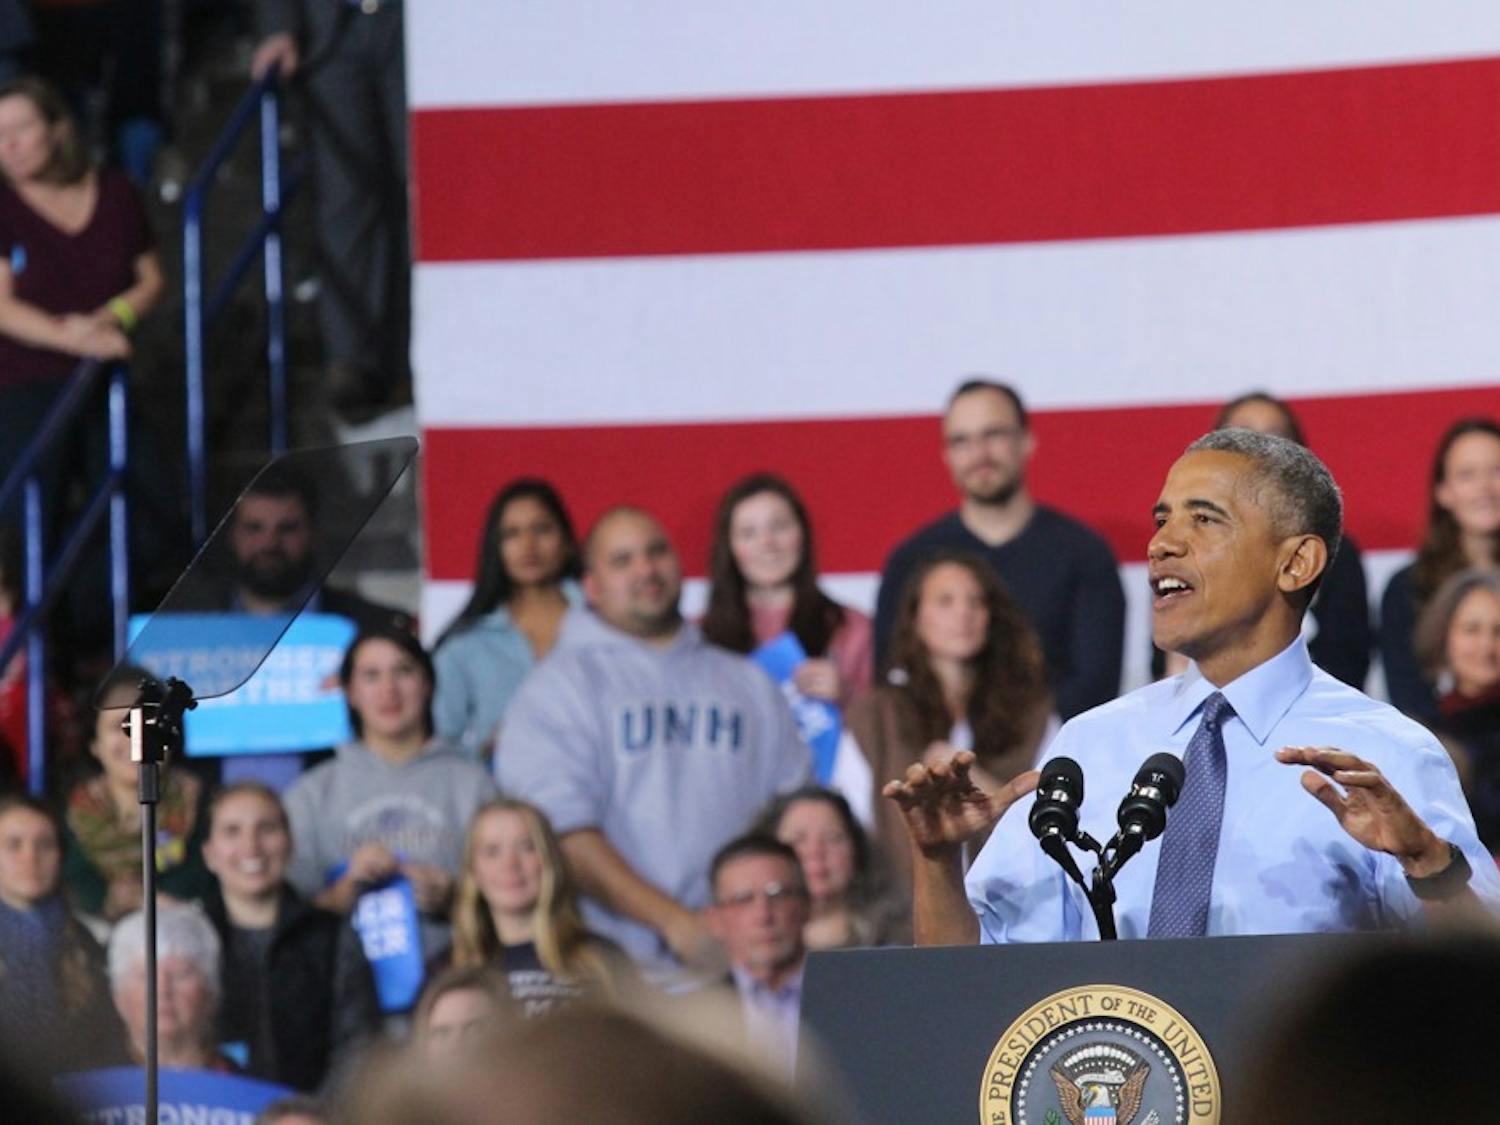 President Barack Obama spoke to a crowd of nearly 8,000 people at the University of New Hampshire in Durham, New Hampshire this afternoon.